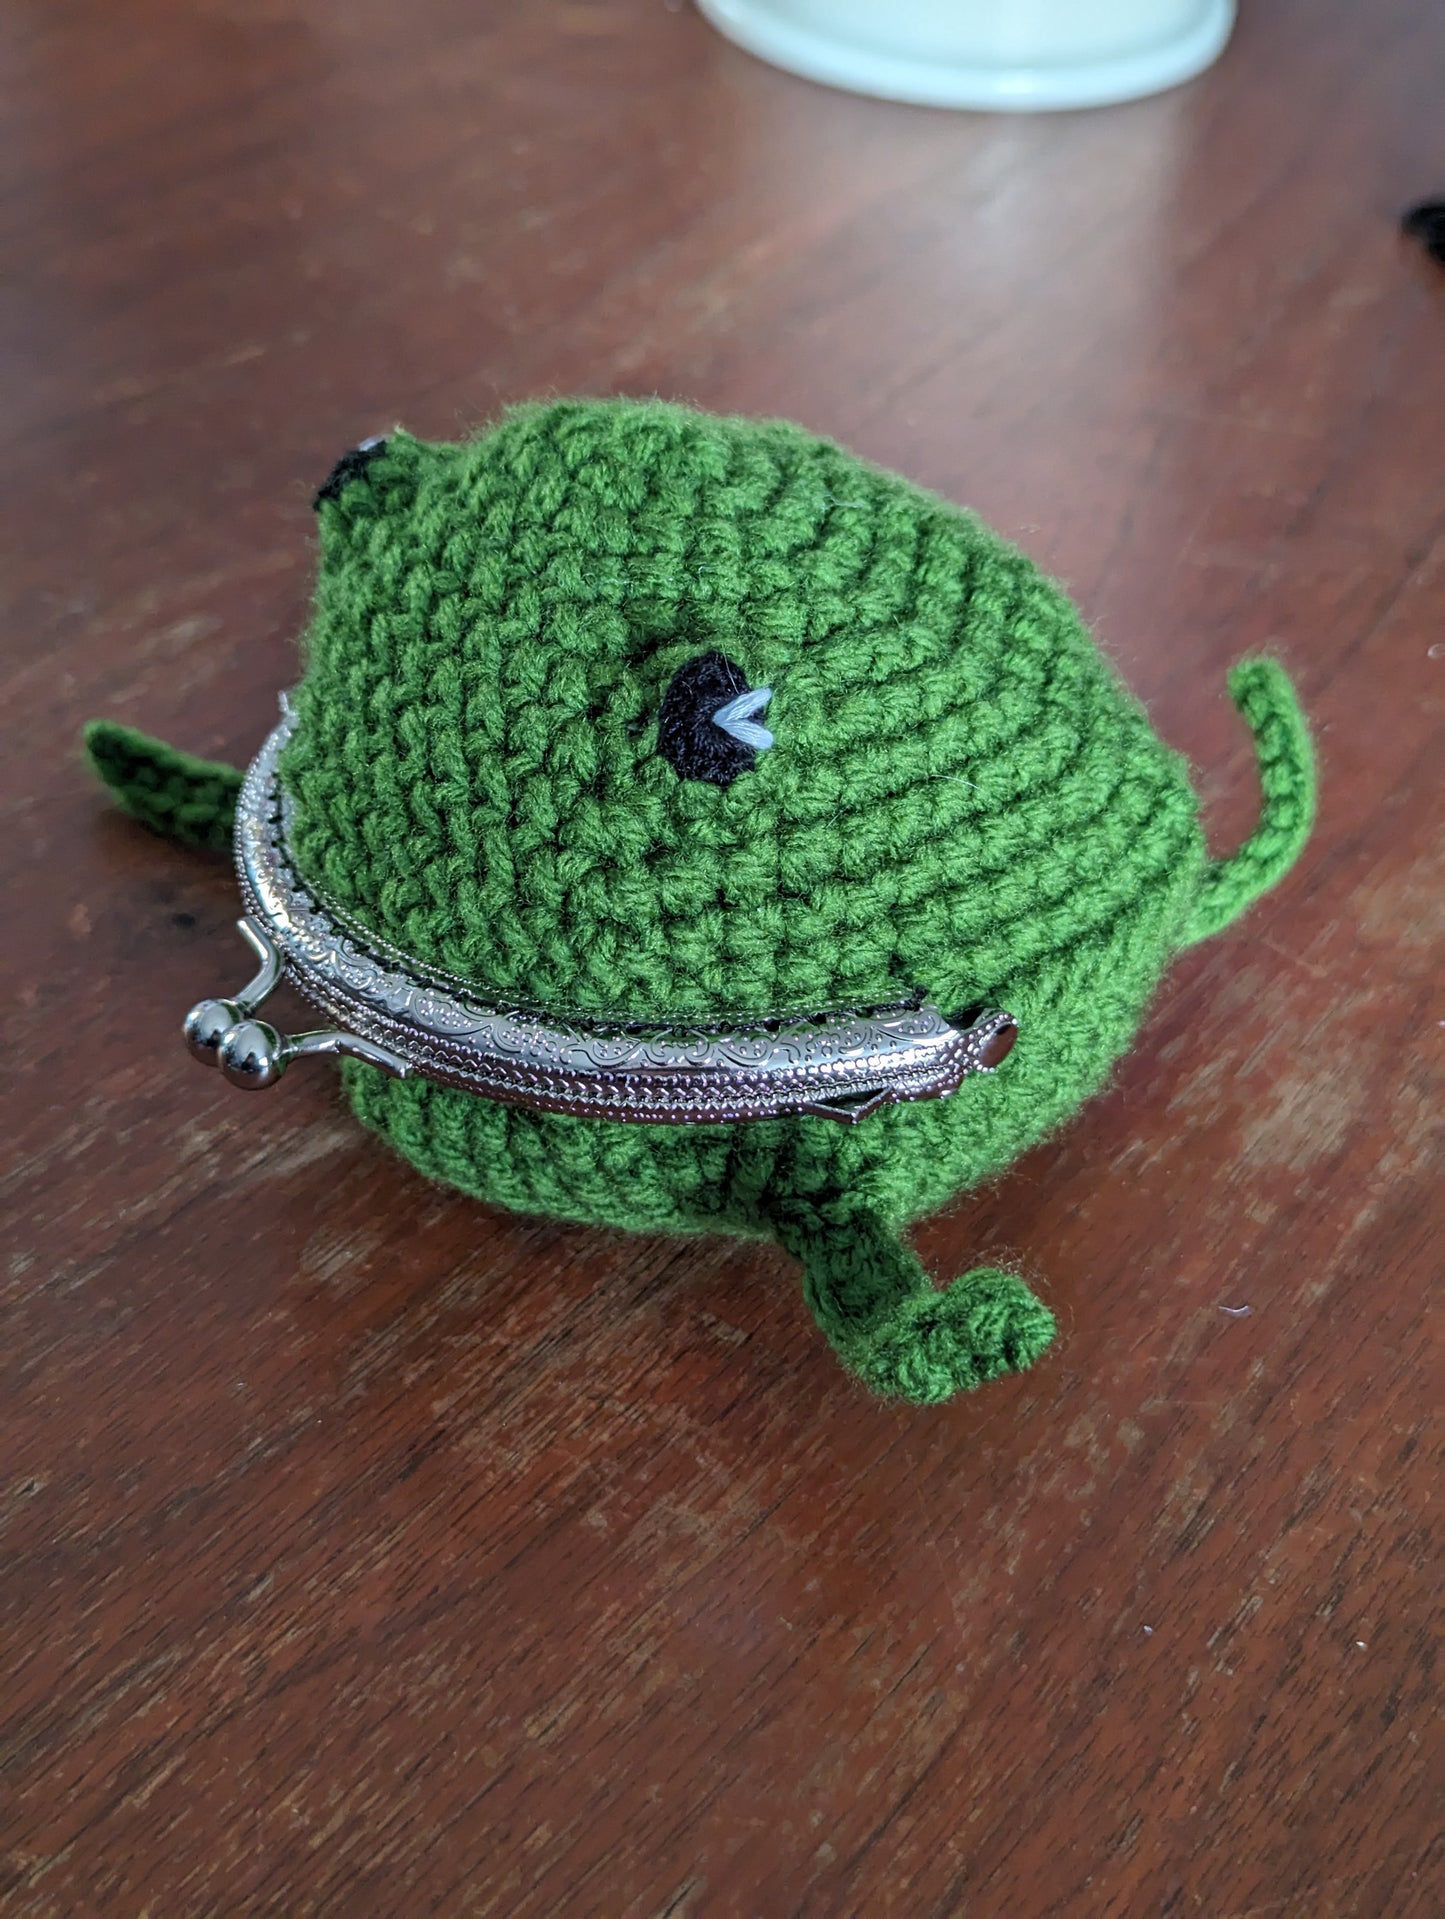 Froggy Clasp Pouch